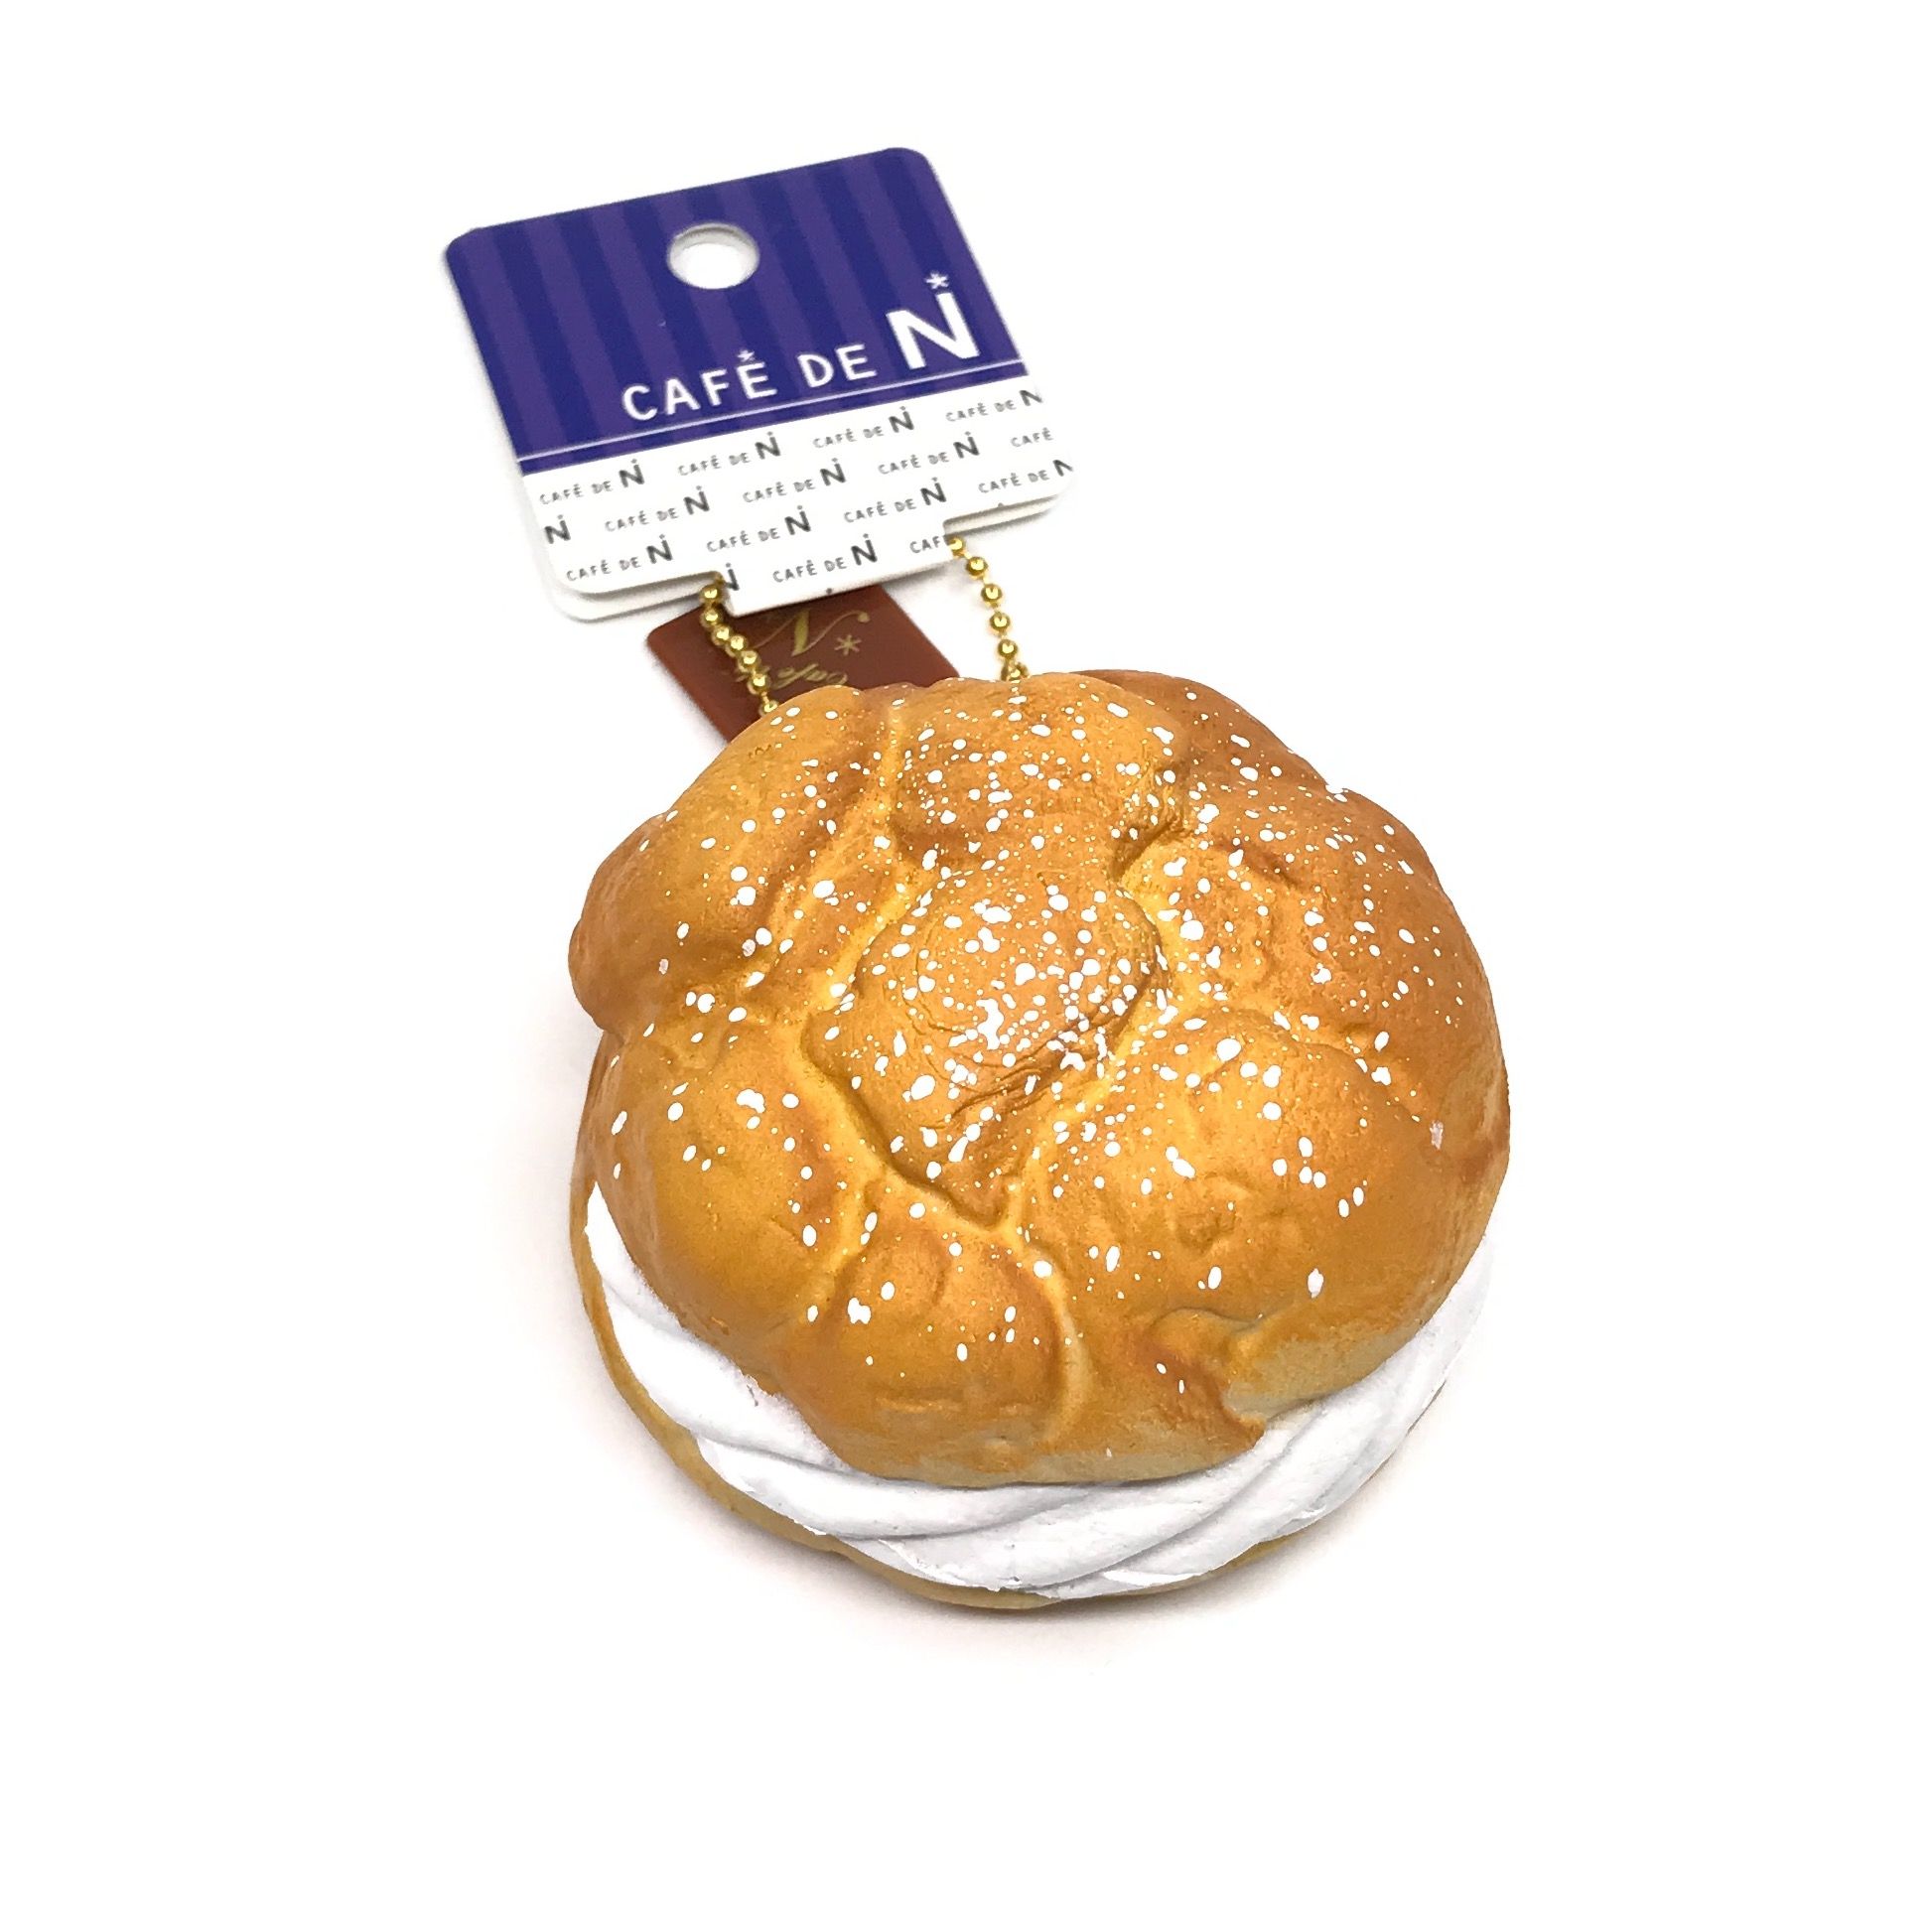 tyktflydende afhængige Hold sammen med Original Japan NIC Cafe De N Milk Cream Puff Squishy Soft And Slow Rising  Squishy Toy Cake Bread Gift Collection Souvenir From Gemini_house, $5.23 |  DHgate.Com